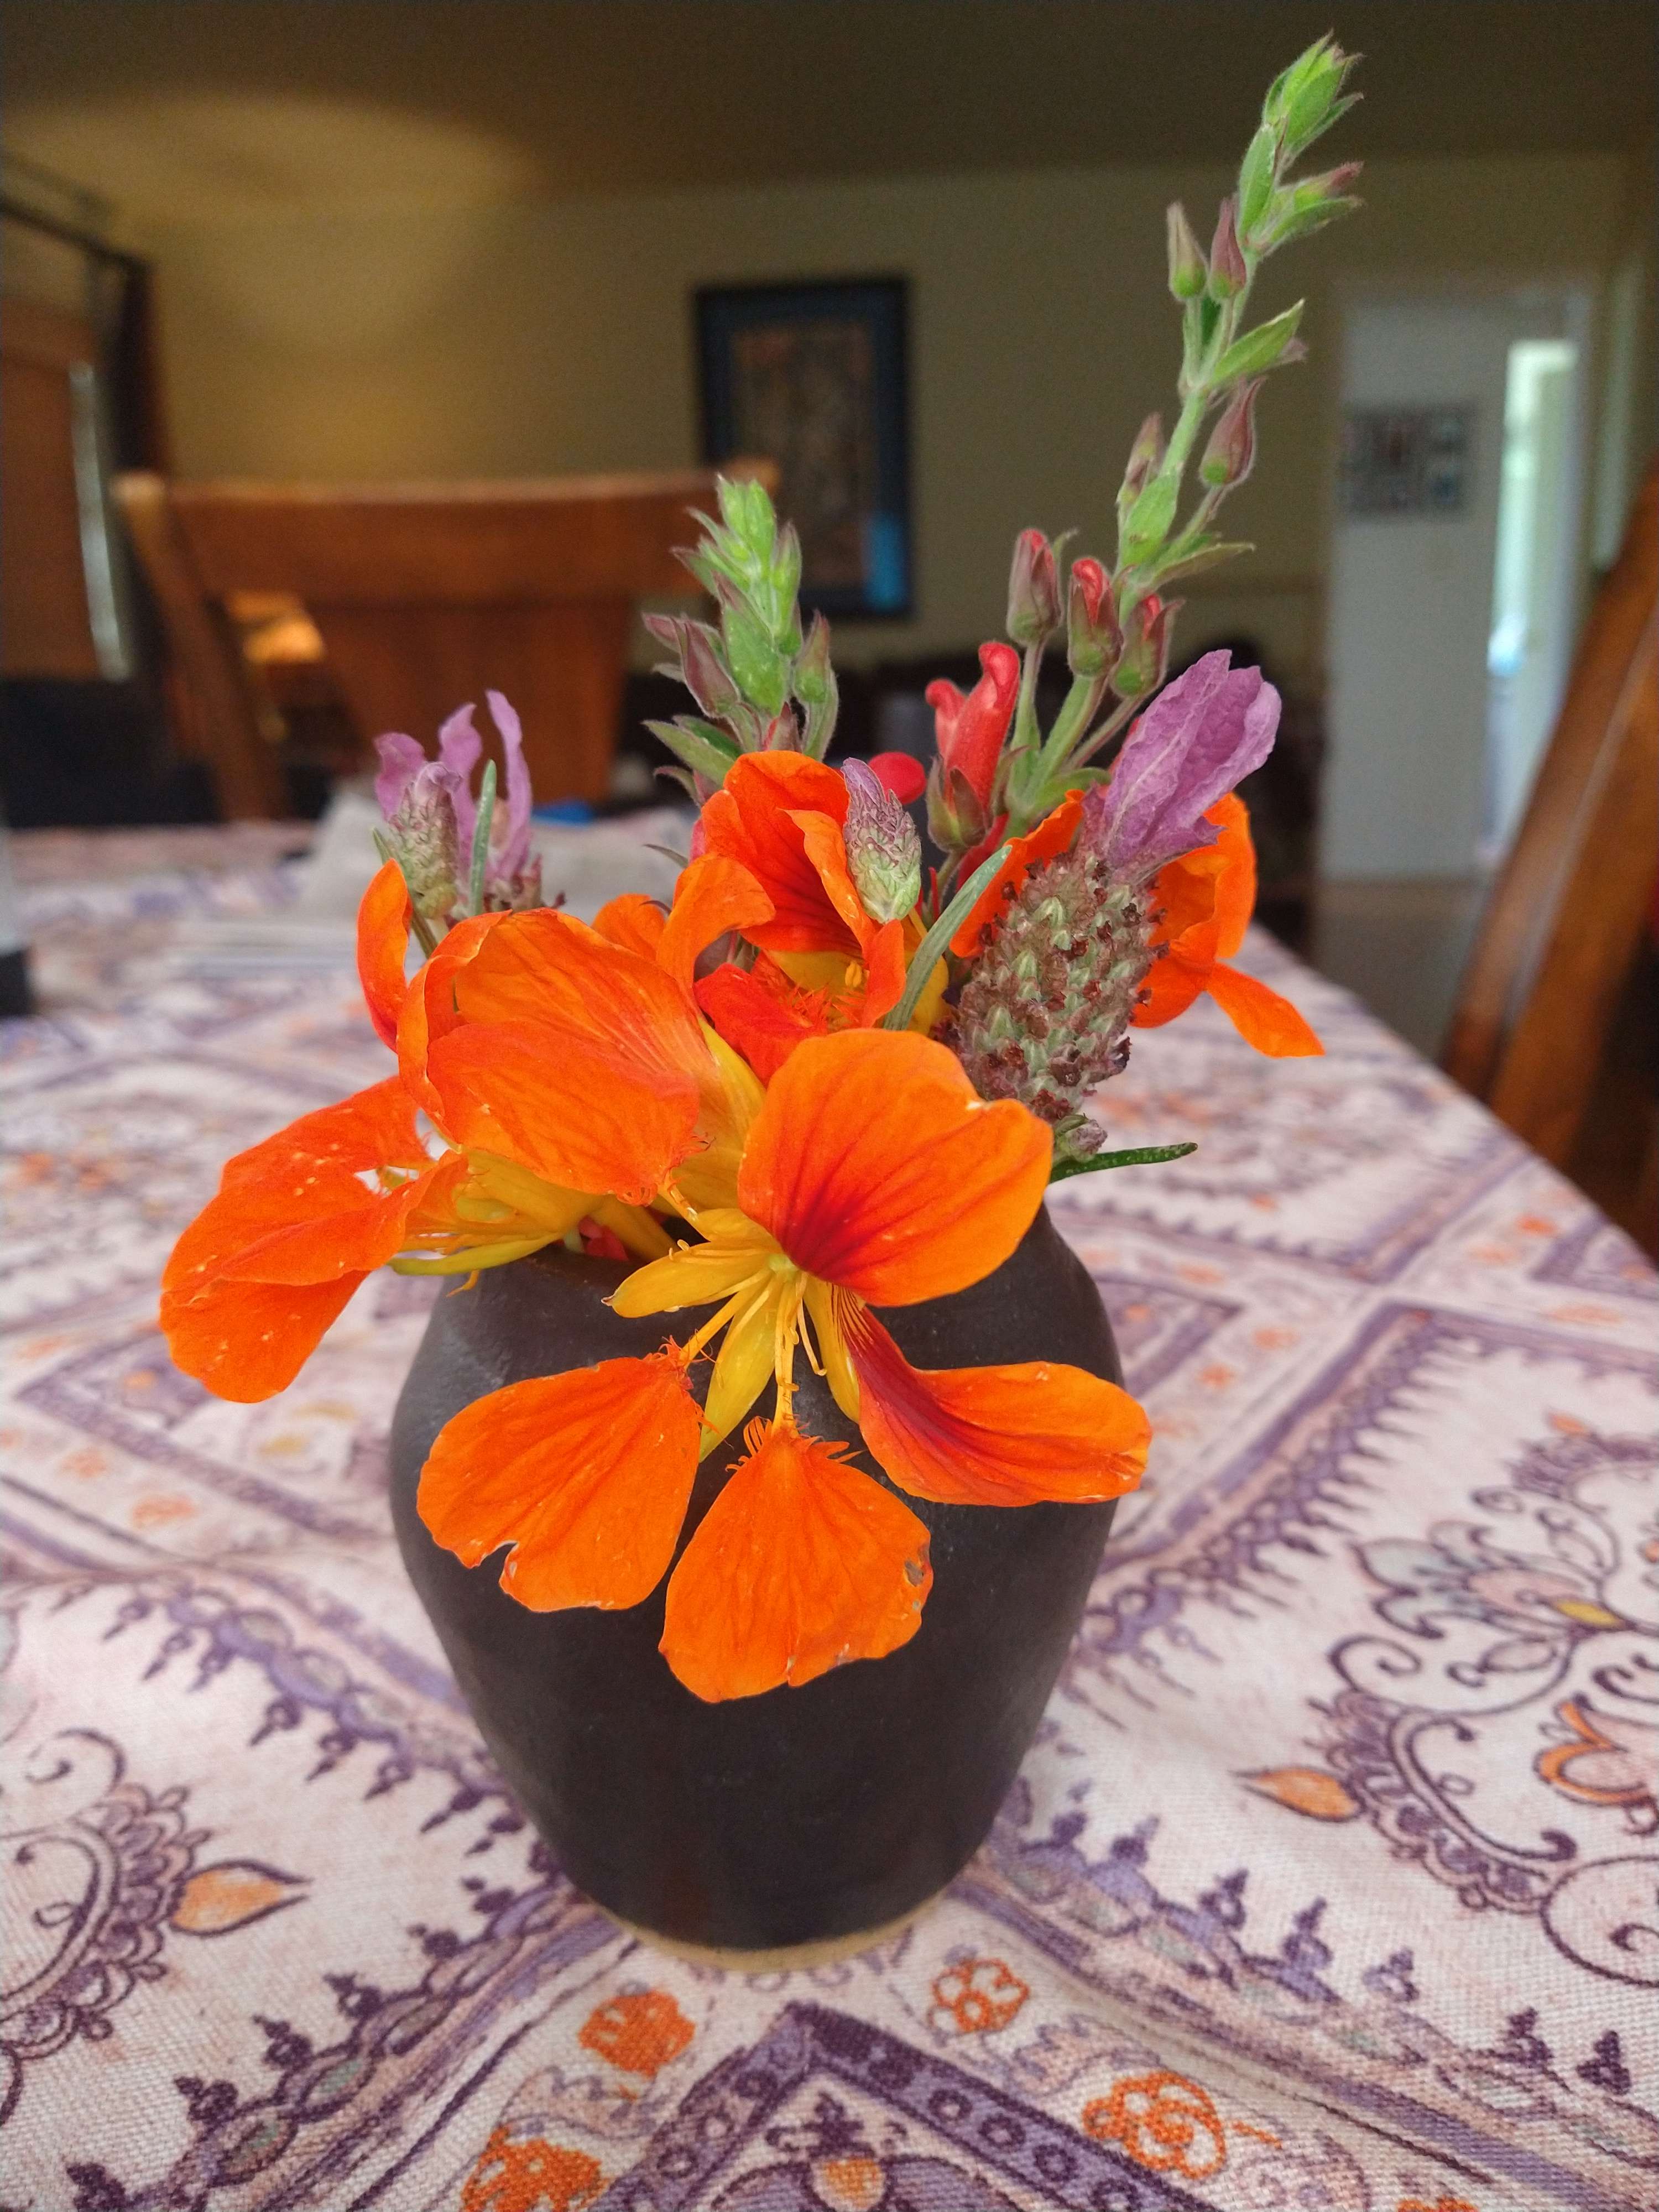 the same vase with orange nasturtiums and other flowers.